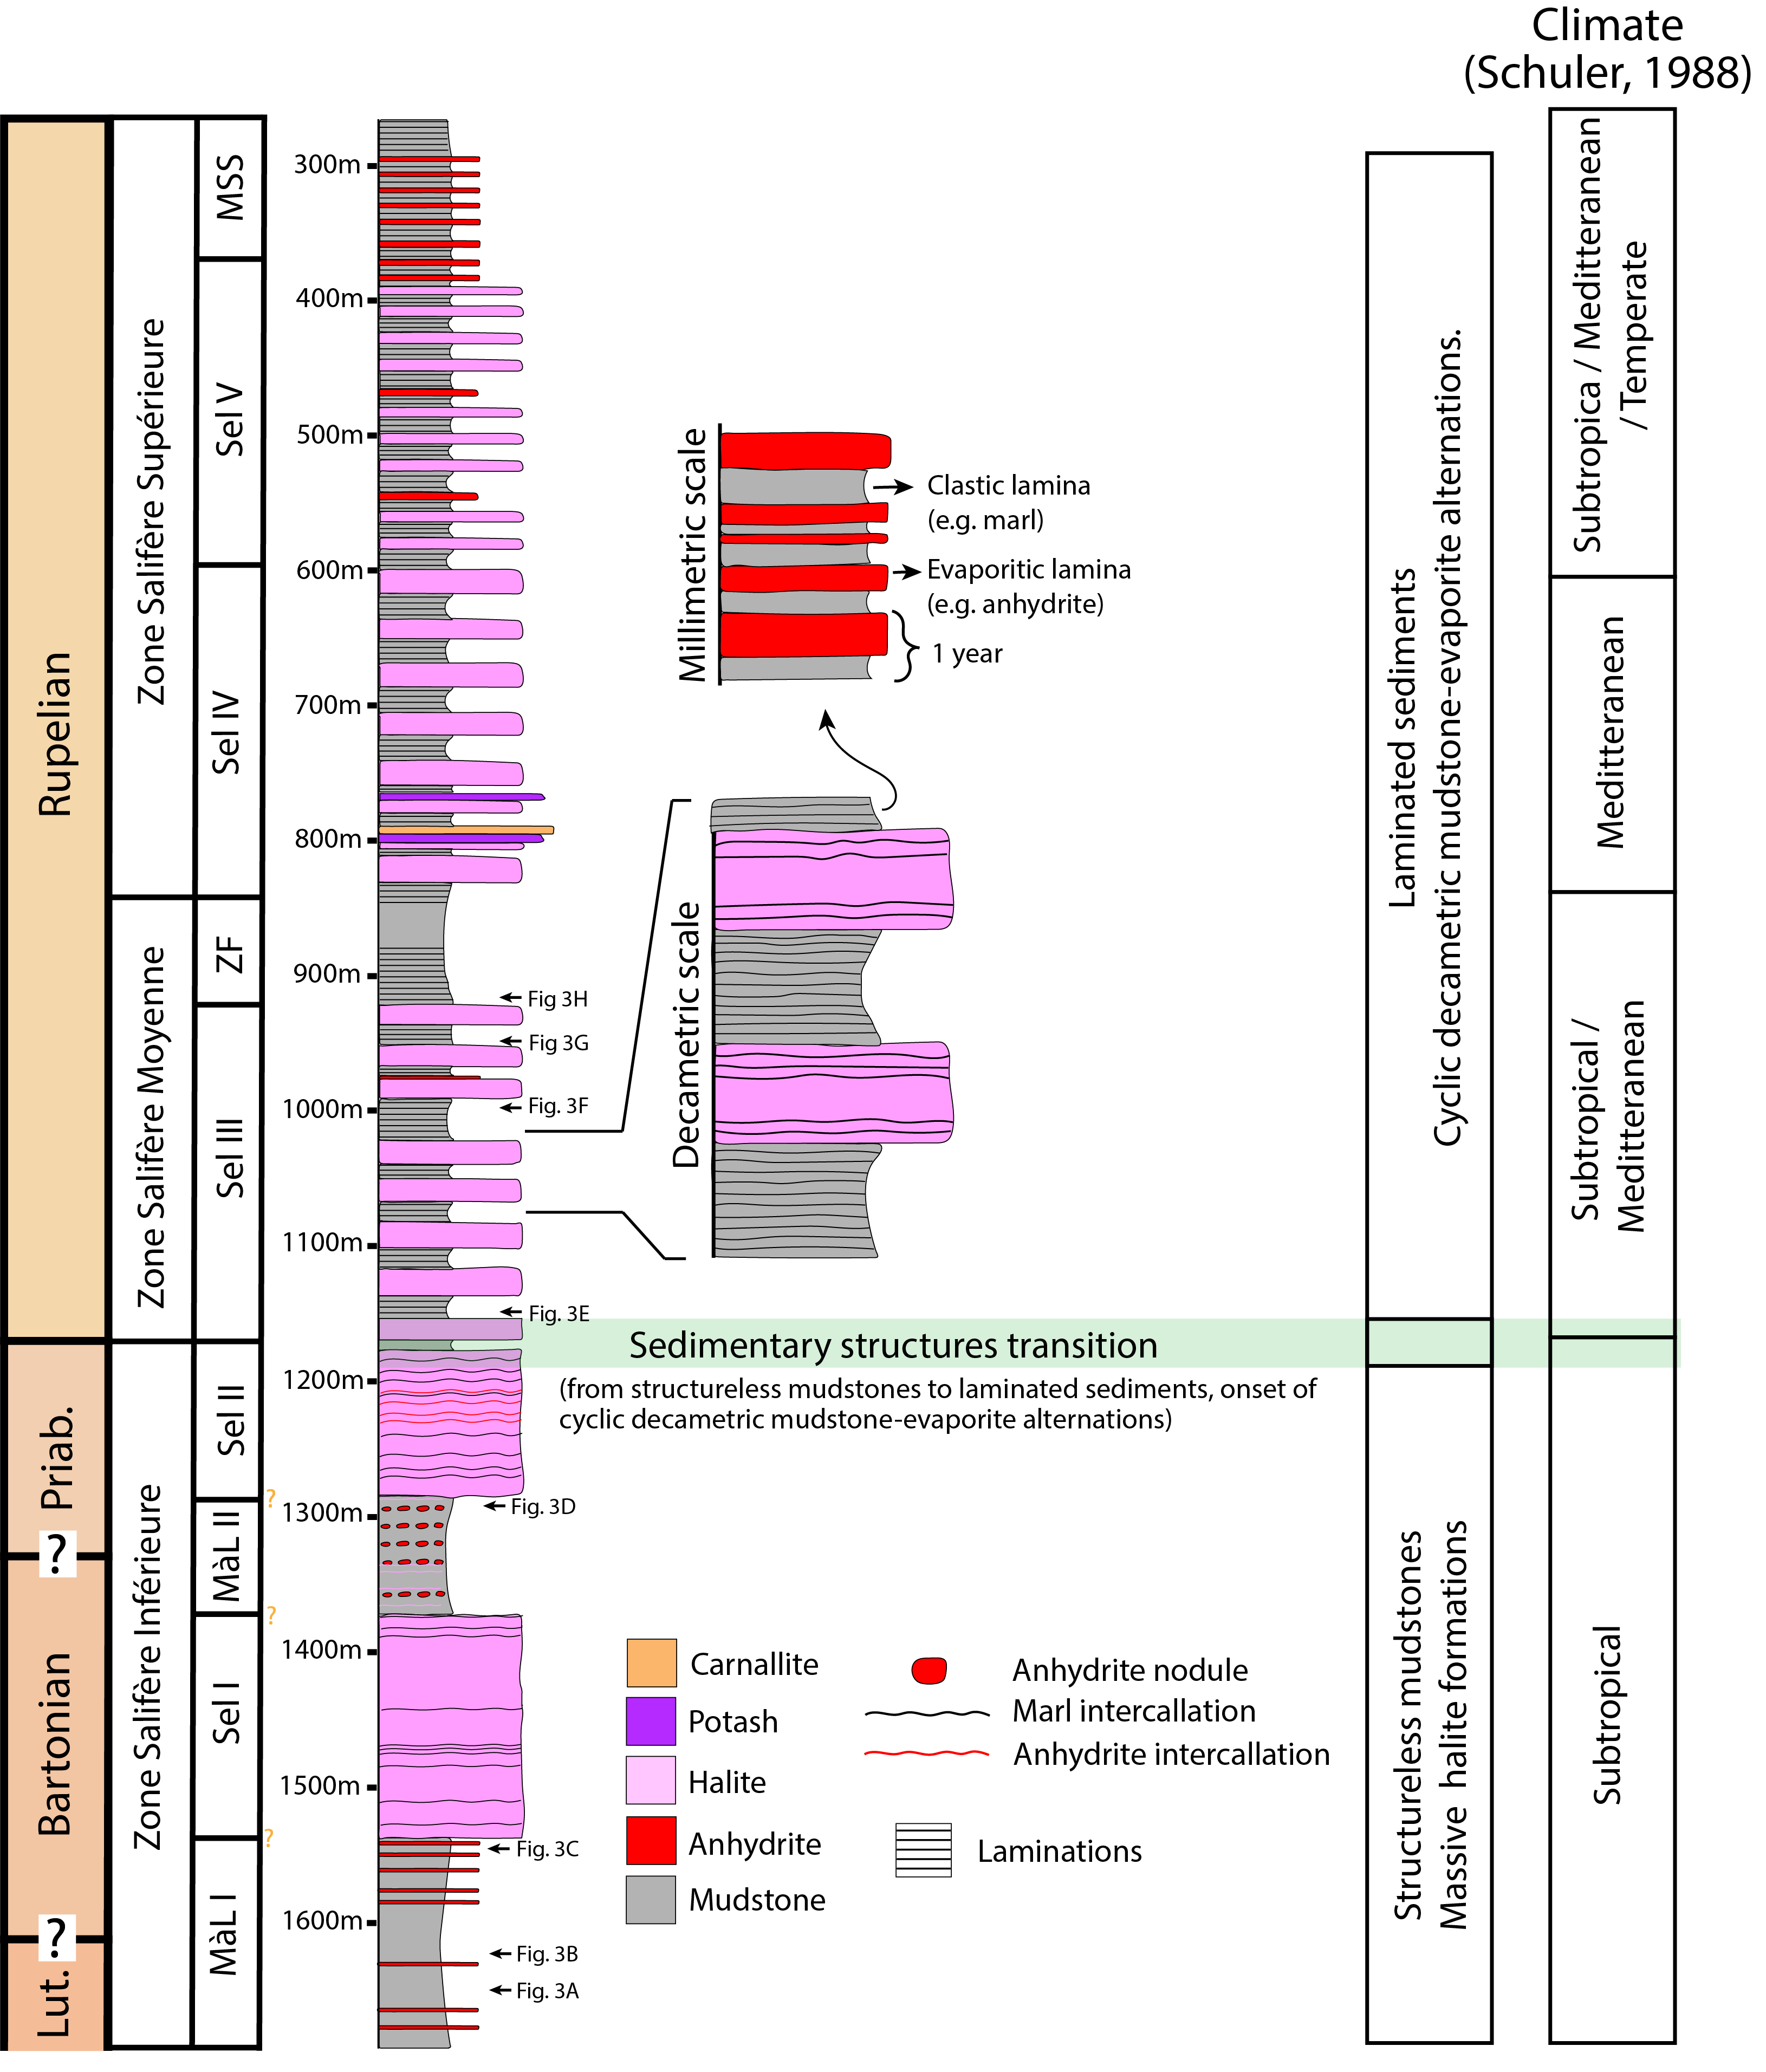 Synthetic log of the sedimentary succession of the Mulhouse Basin’s formations through a segment of the DP-XXVIII well, with the paleoclimatic observations inferred from palynology.